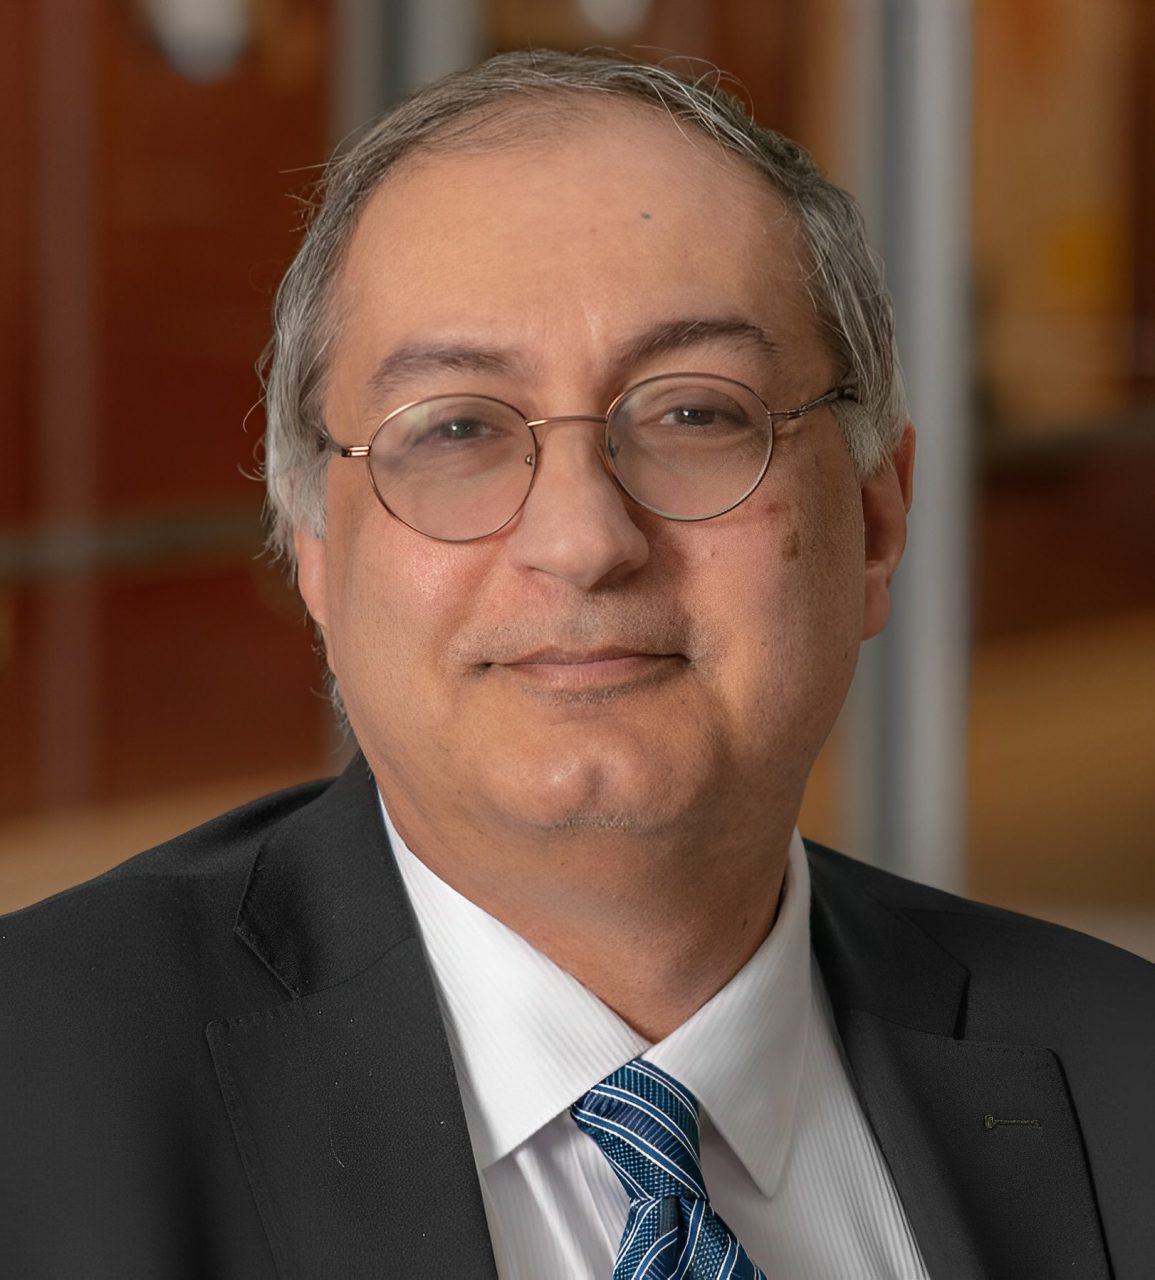 Wafik S. El-Deiry: I am super excited to be able to share guest editorial in The Cancer Letter with the vision for the Worldwide Innovative Network WIN Consortium in cancer personalized medicine